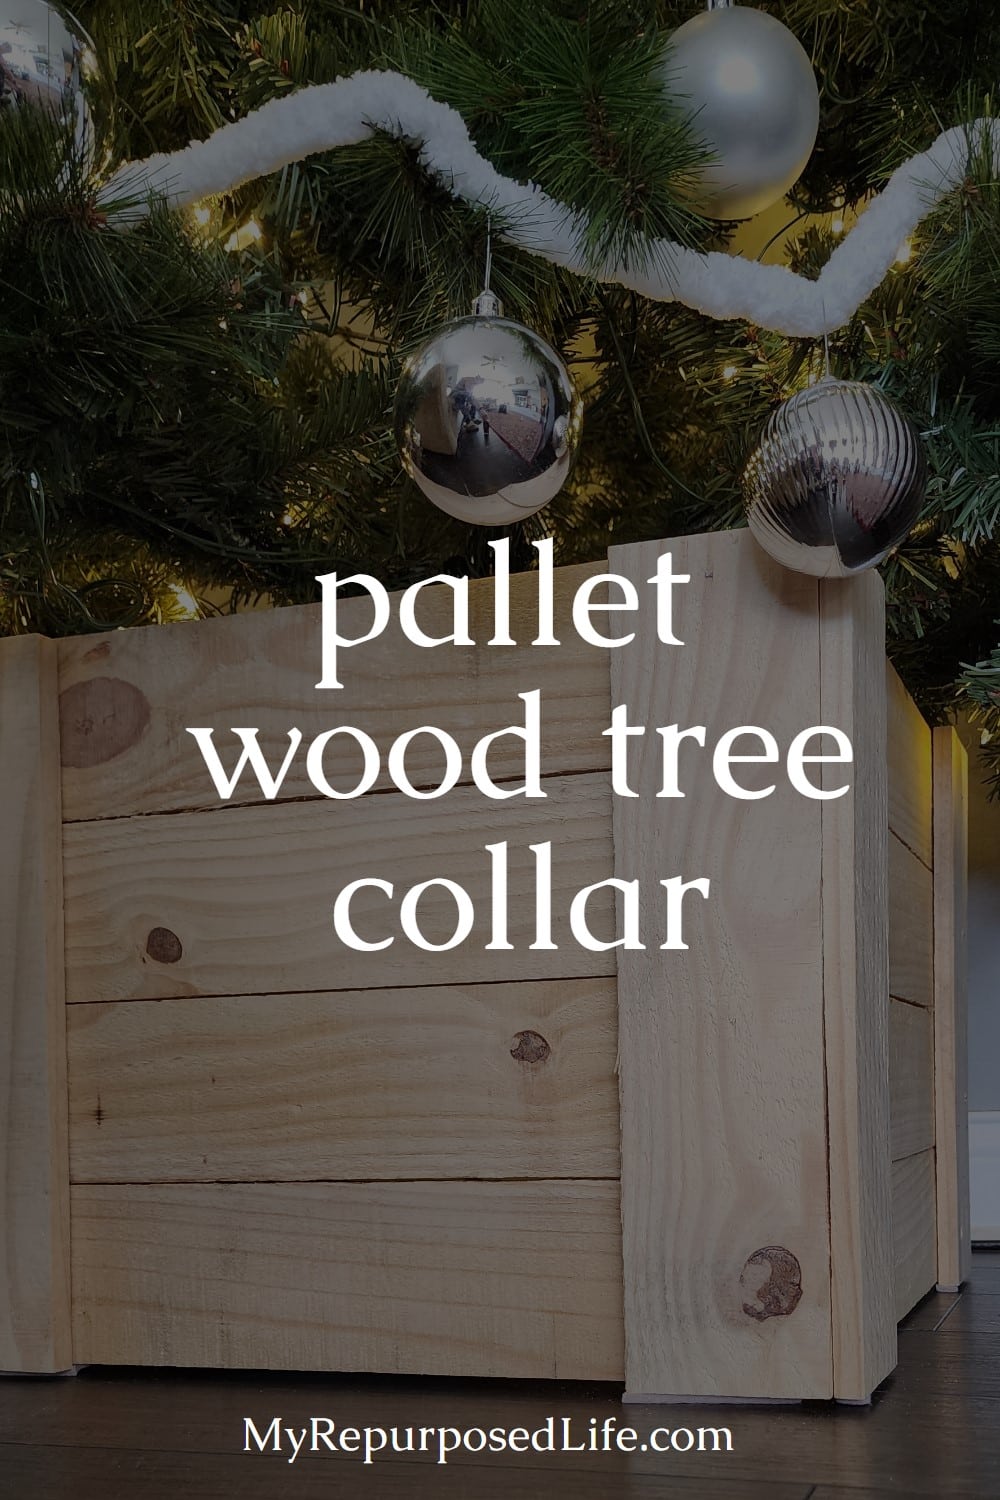 When you need a special sized tree collar, why not make your own pallet wood tree collar? This design is so simple to make, and it's virtually FREE if you use pallet or reclaimed wood. Directions and tips included in this article. #MyRepurposedLife #Christmas #pallet #treecollar via @repurposedlife